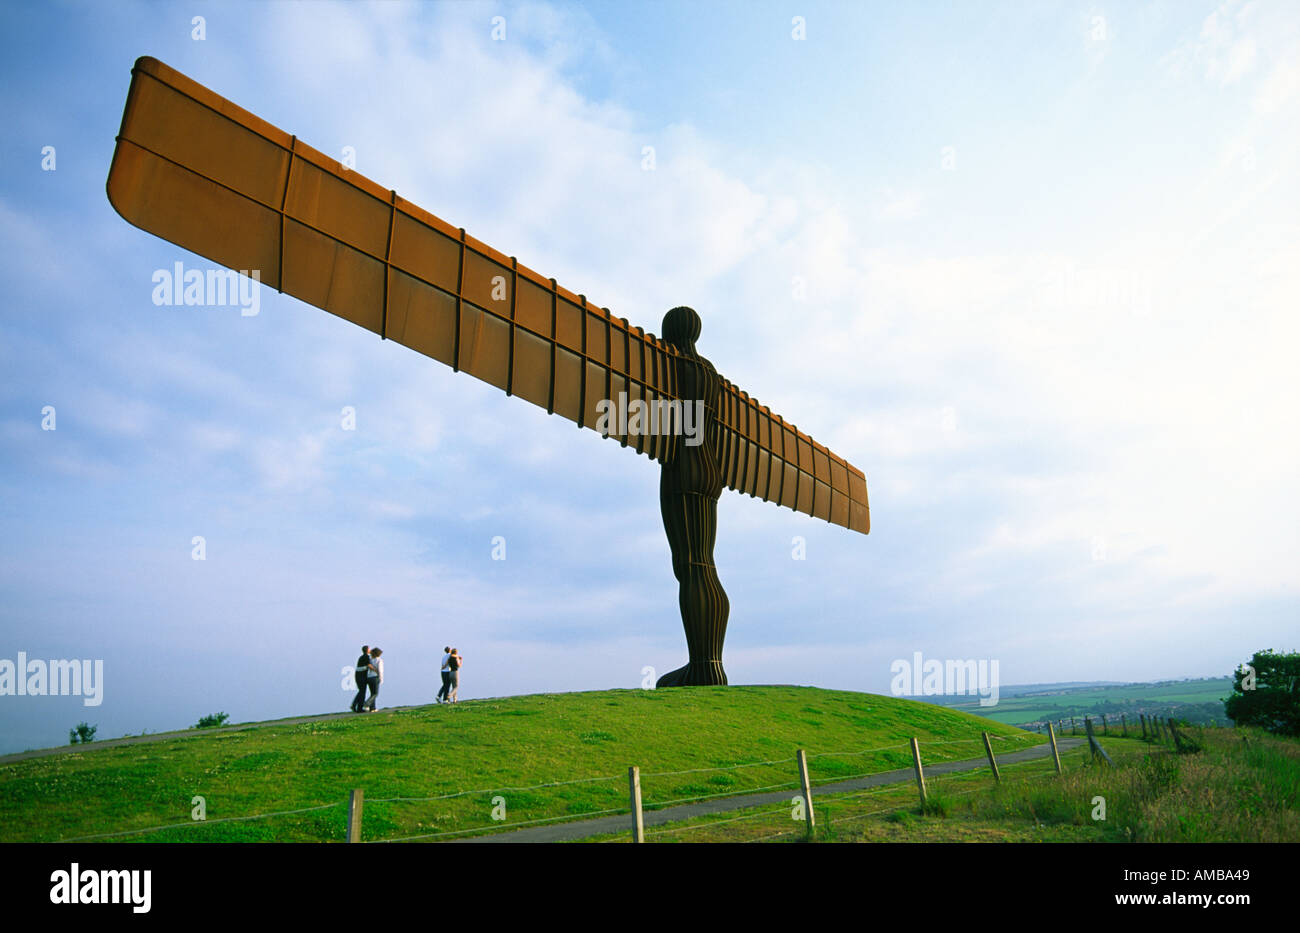 Angel of the North modern statue public sculpture by artist Anthony Gormley in Gateshead, Tyneside, England. Stock Photo